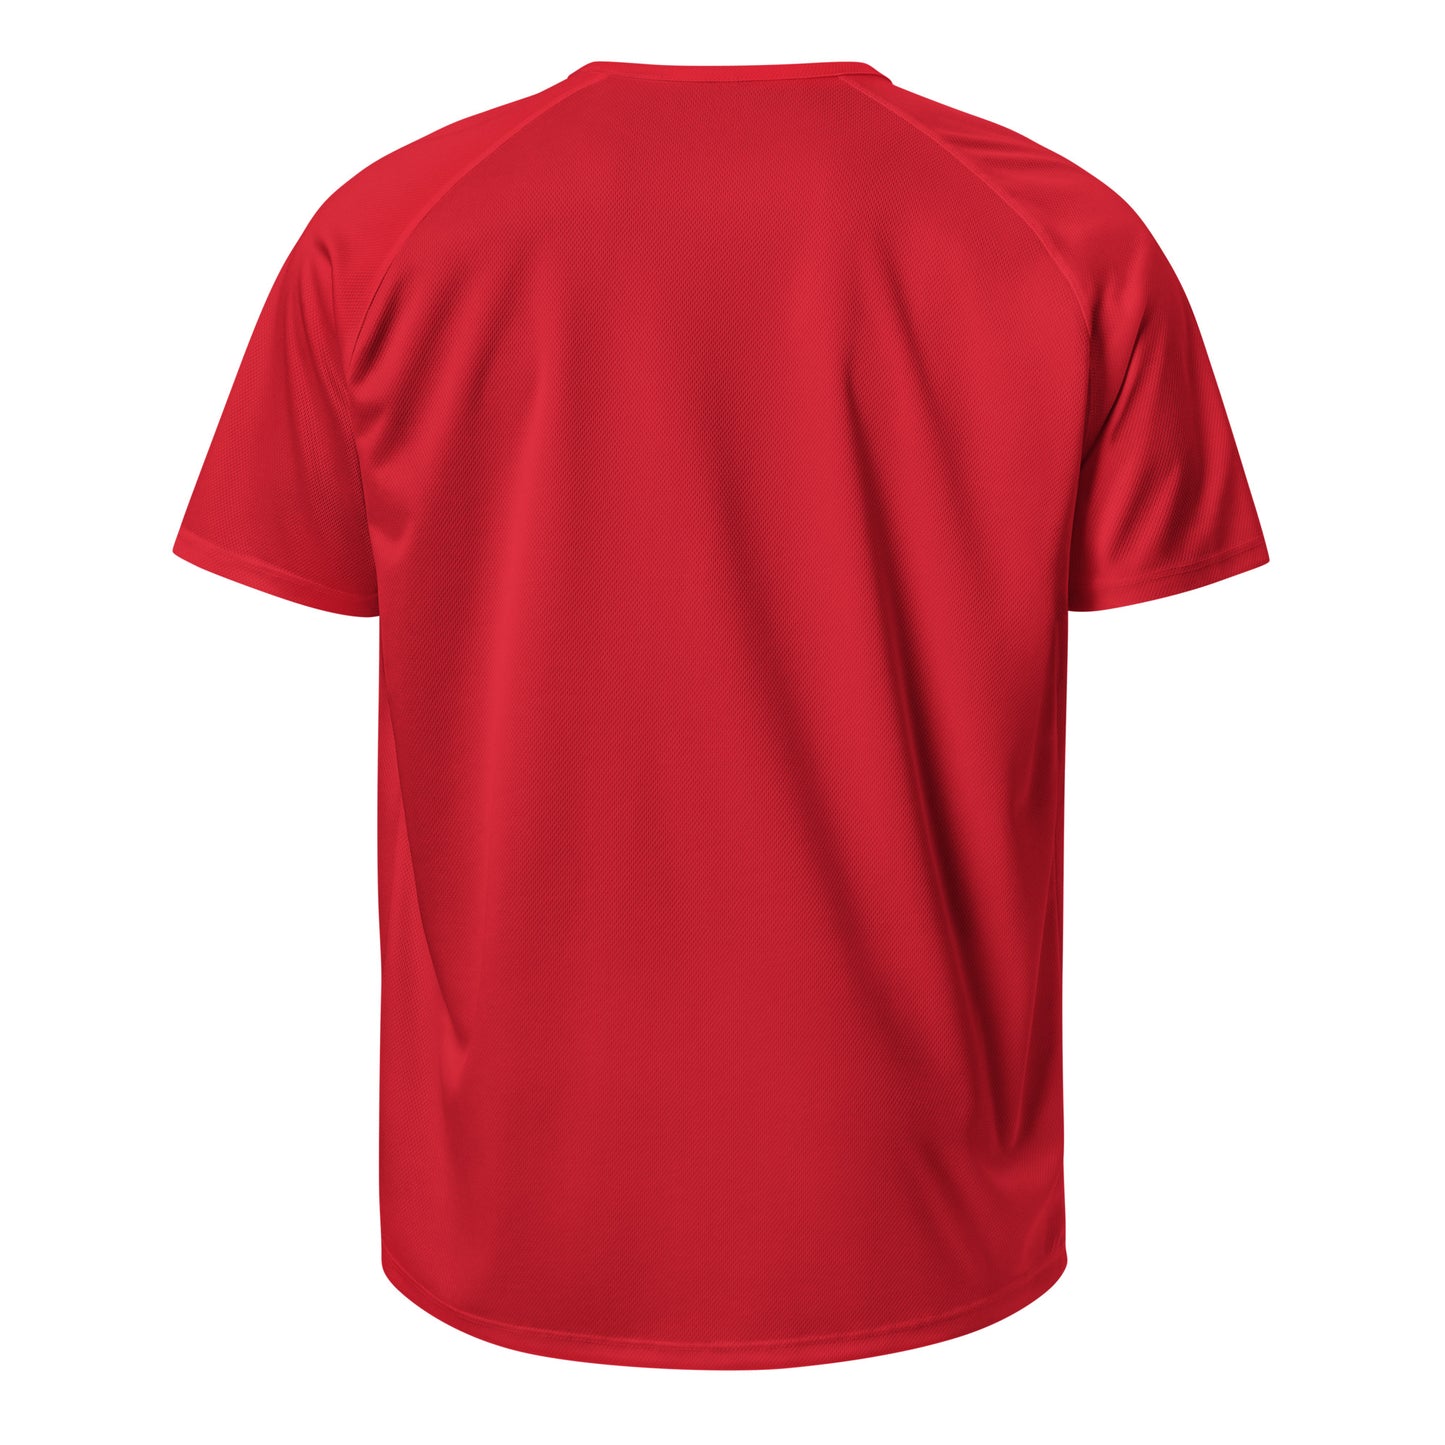 E144 - Sports/Breathable Fabric (MX win/woman : Red)